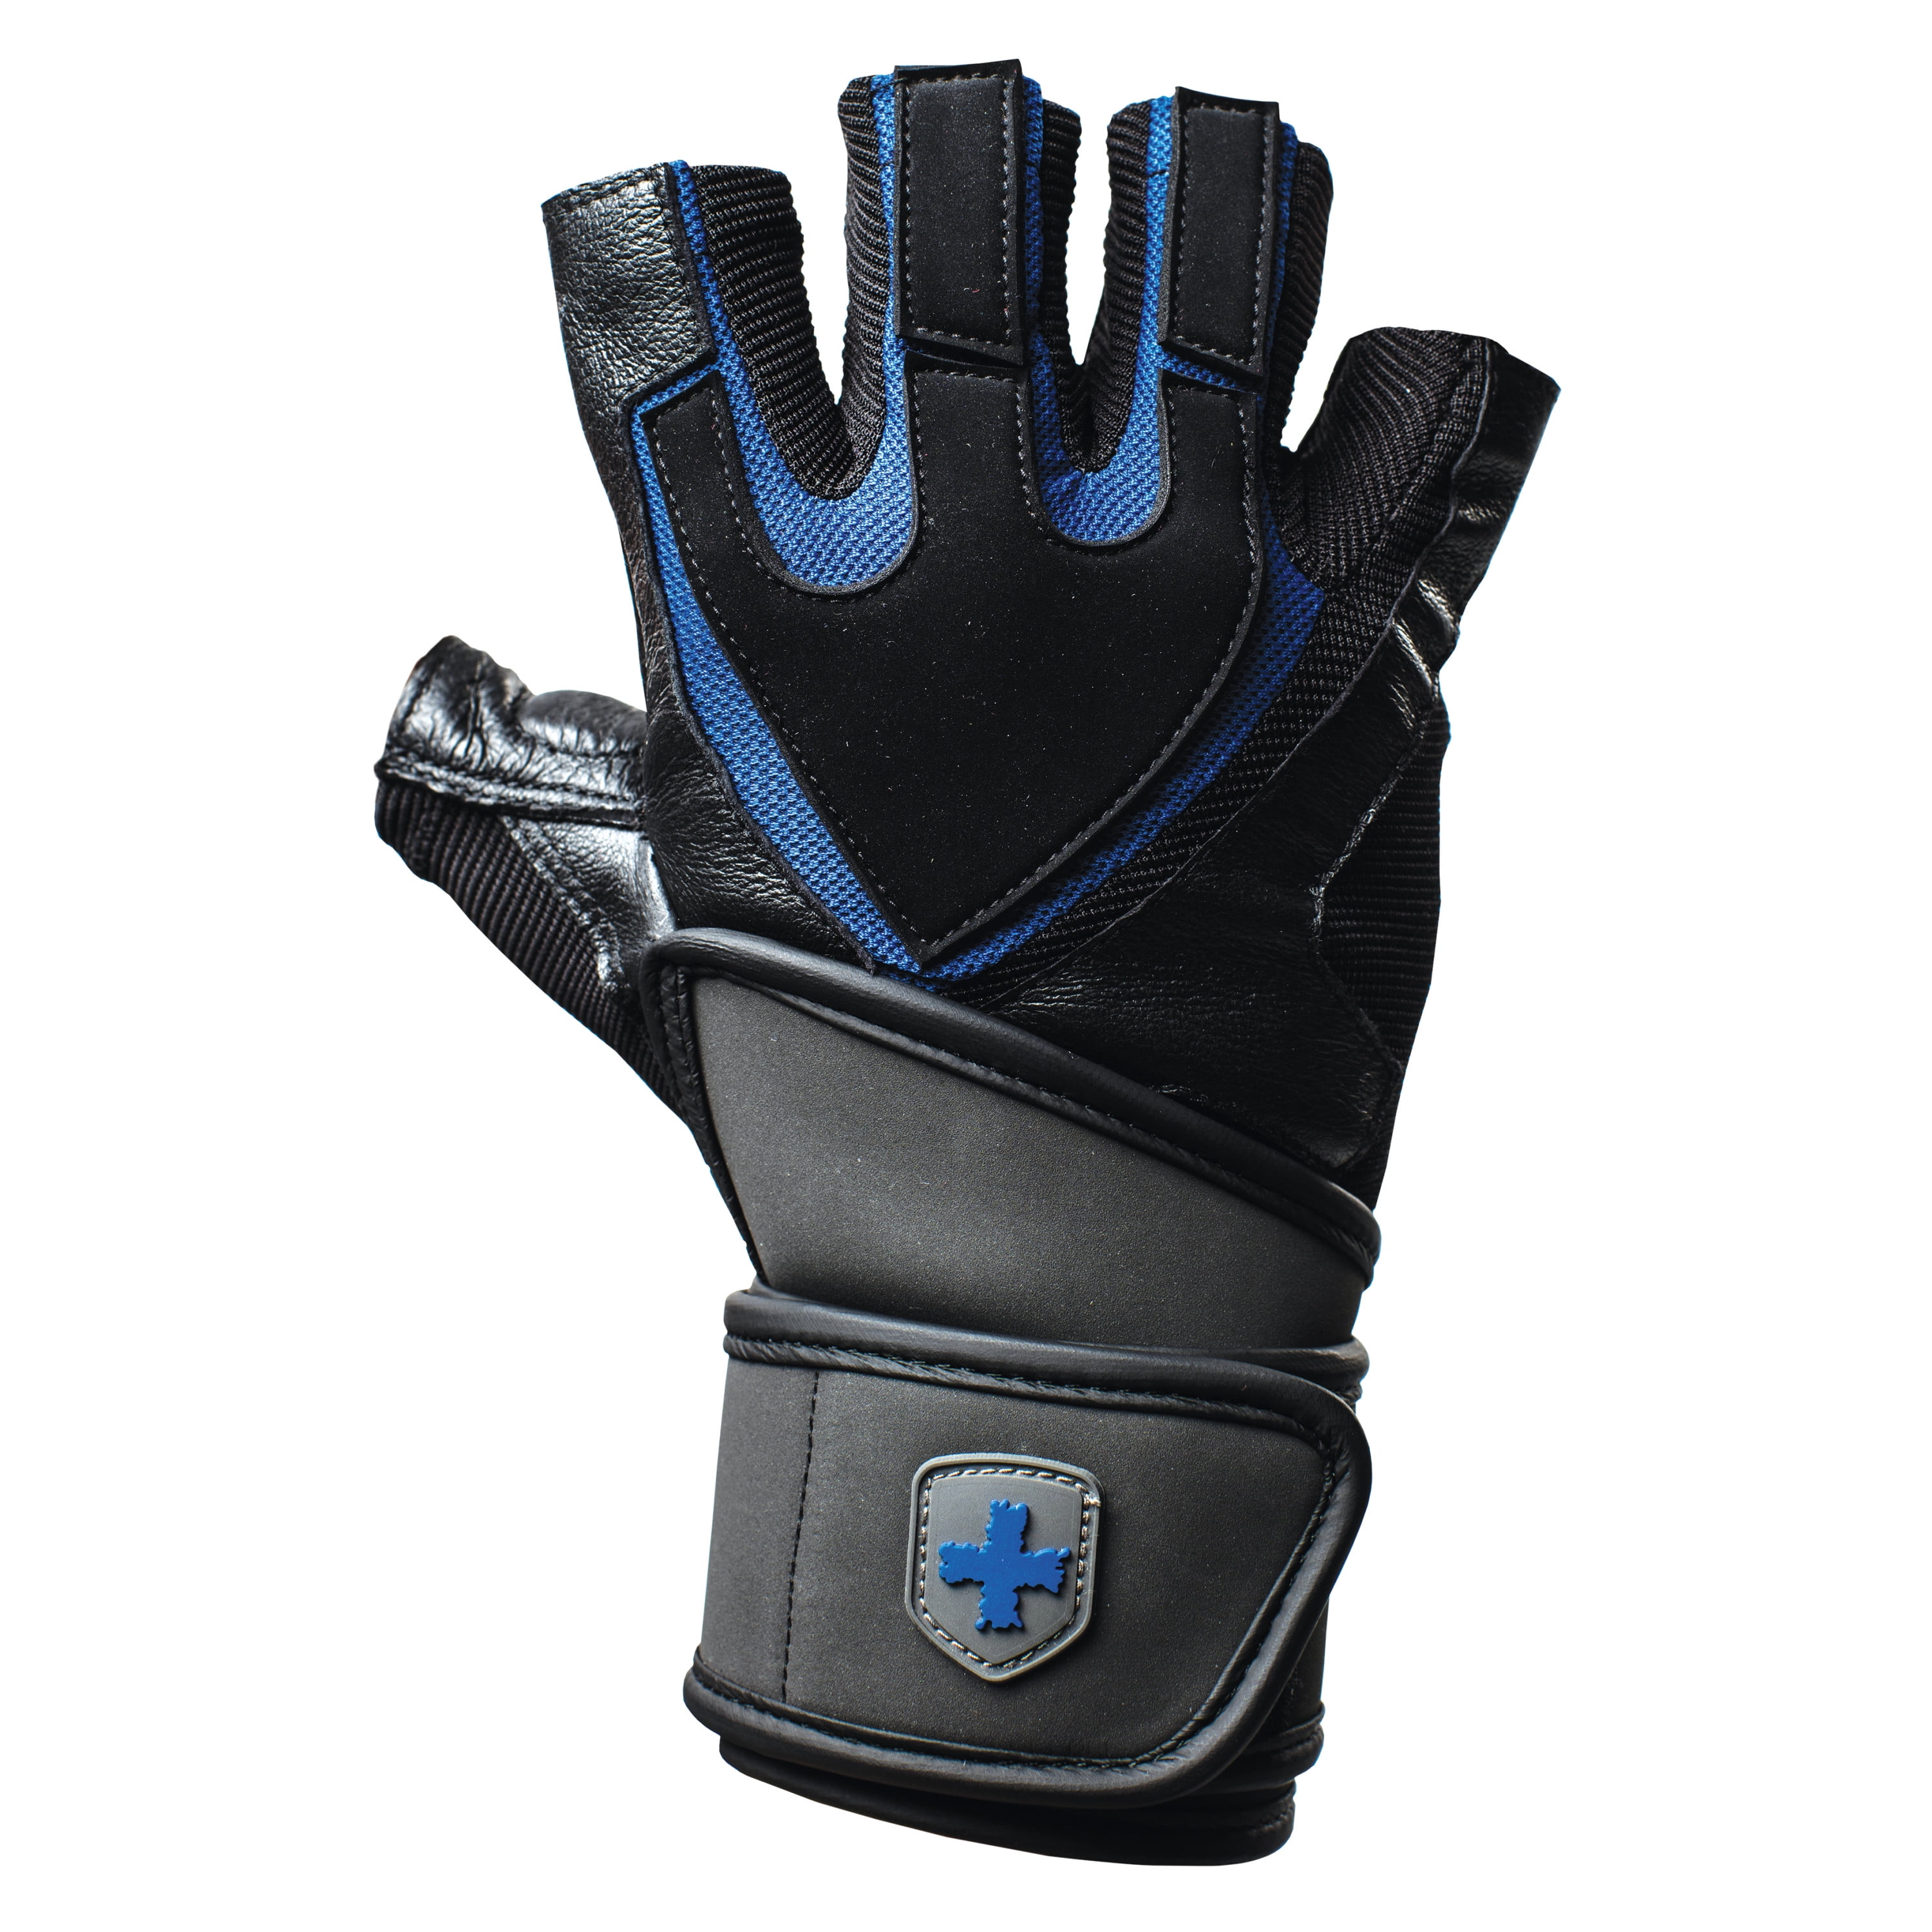 Details about   Mava Sports Leather Hand Grips with Wrist Support Pull Ups Gloves Blue XL 